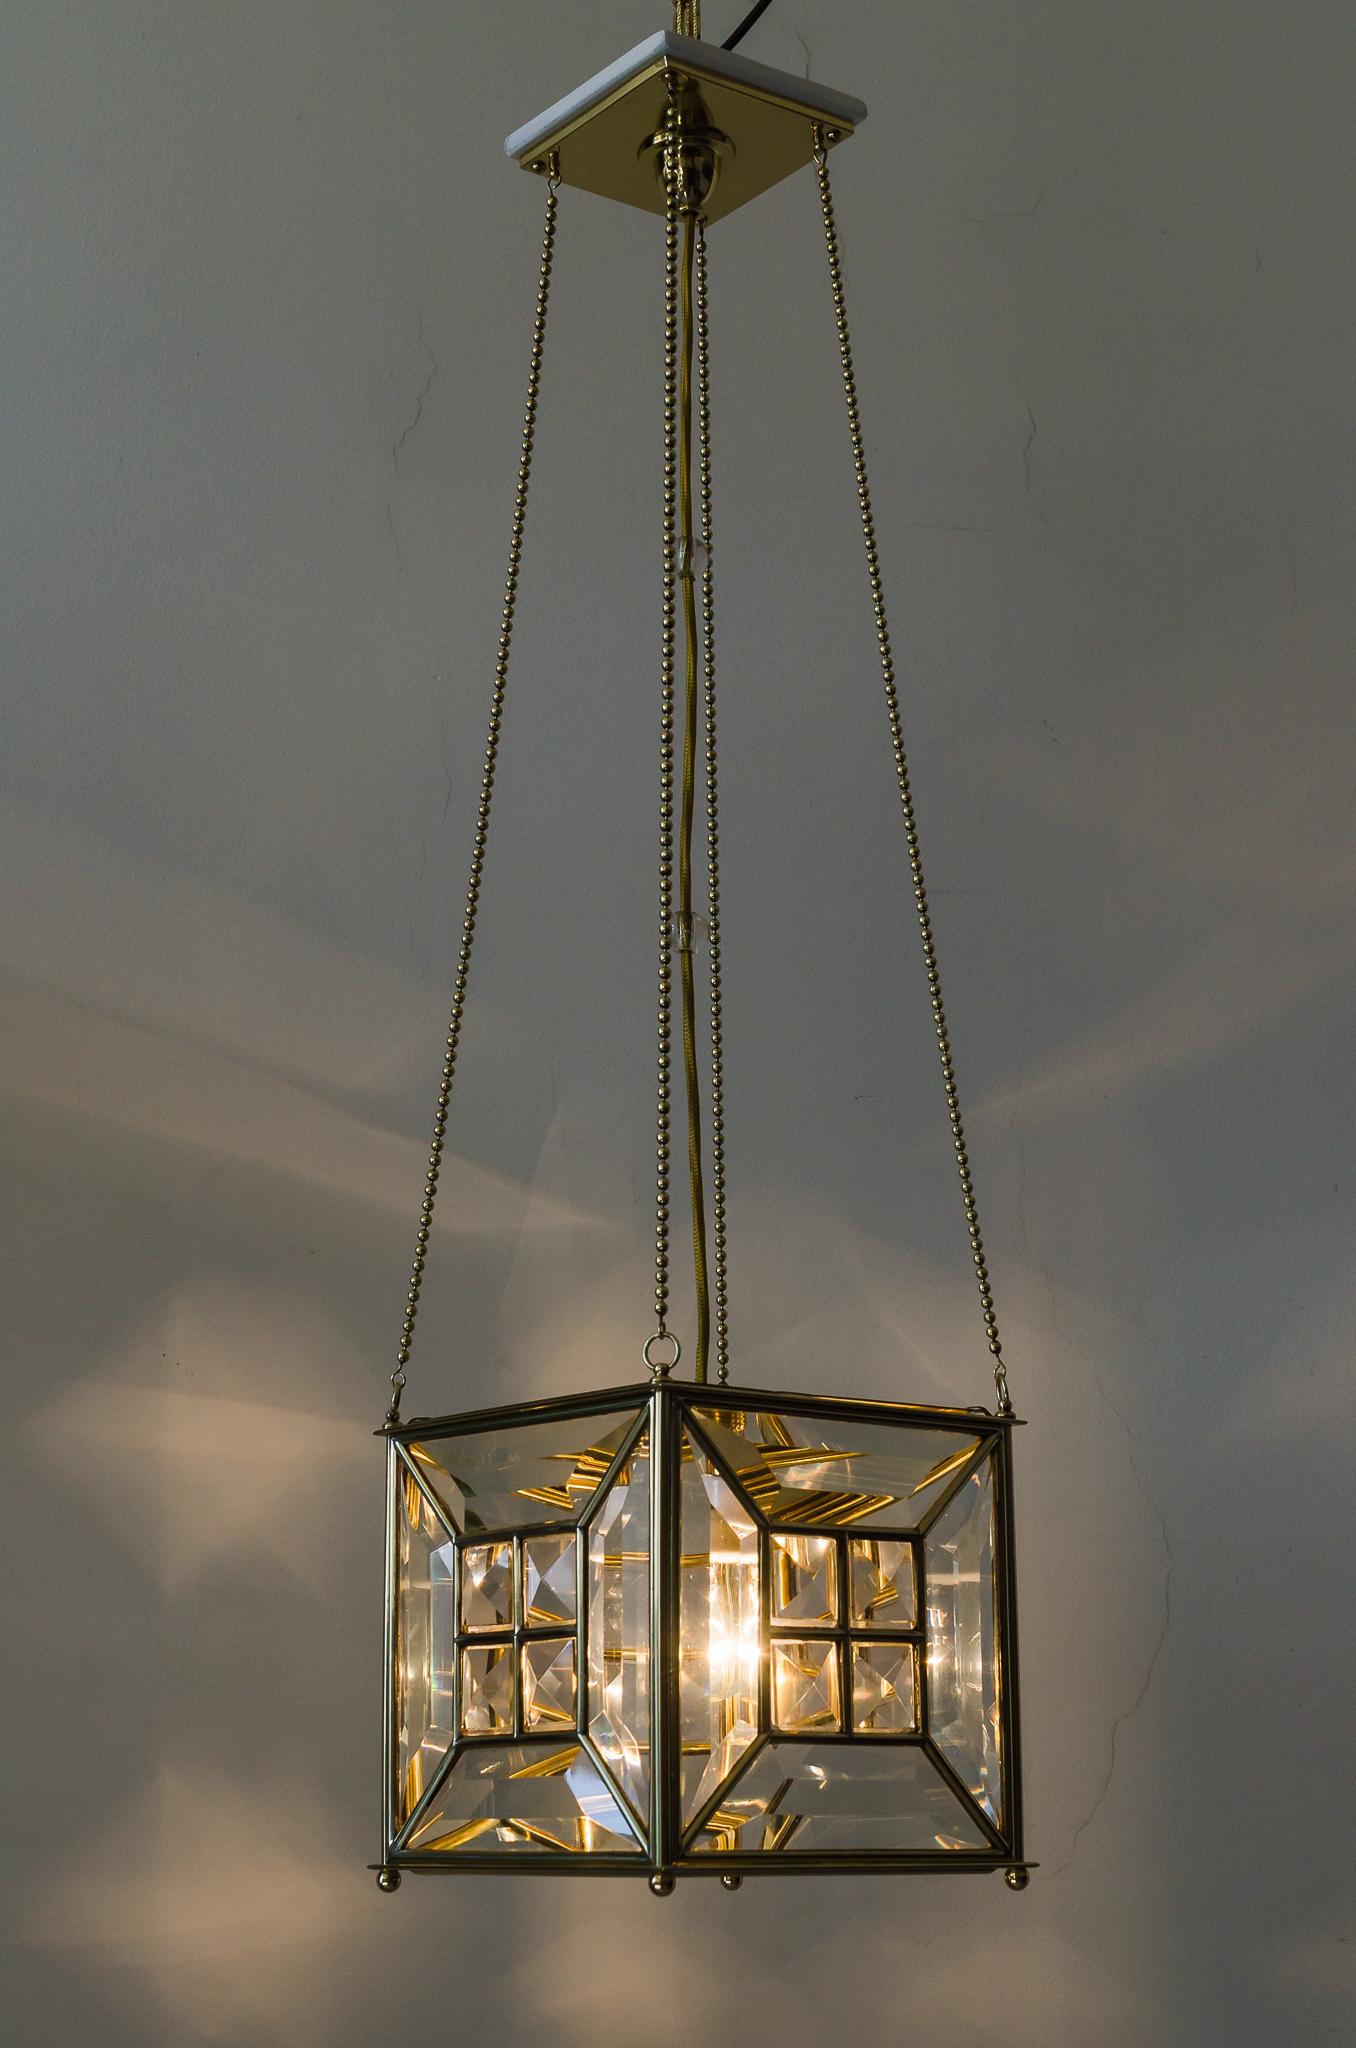 An amazing execution of an Jugendstil pendant.
Original cut-glass.
White painted wood plate on the top.
Two small glass balls on the middle wire (see last picture)
Brass polished and stove enameled.